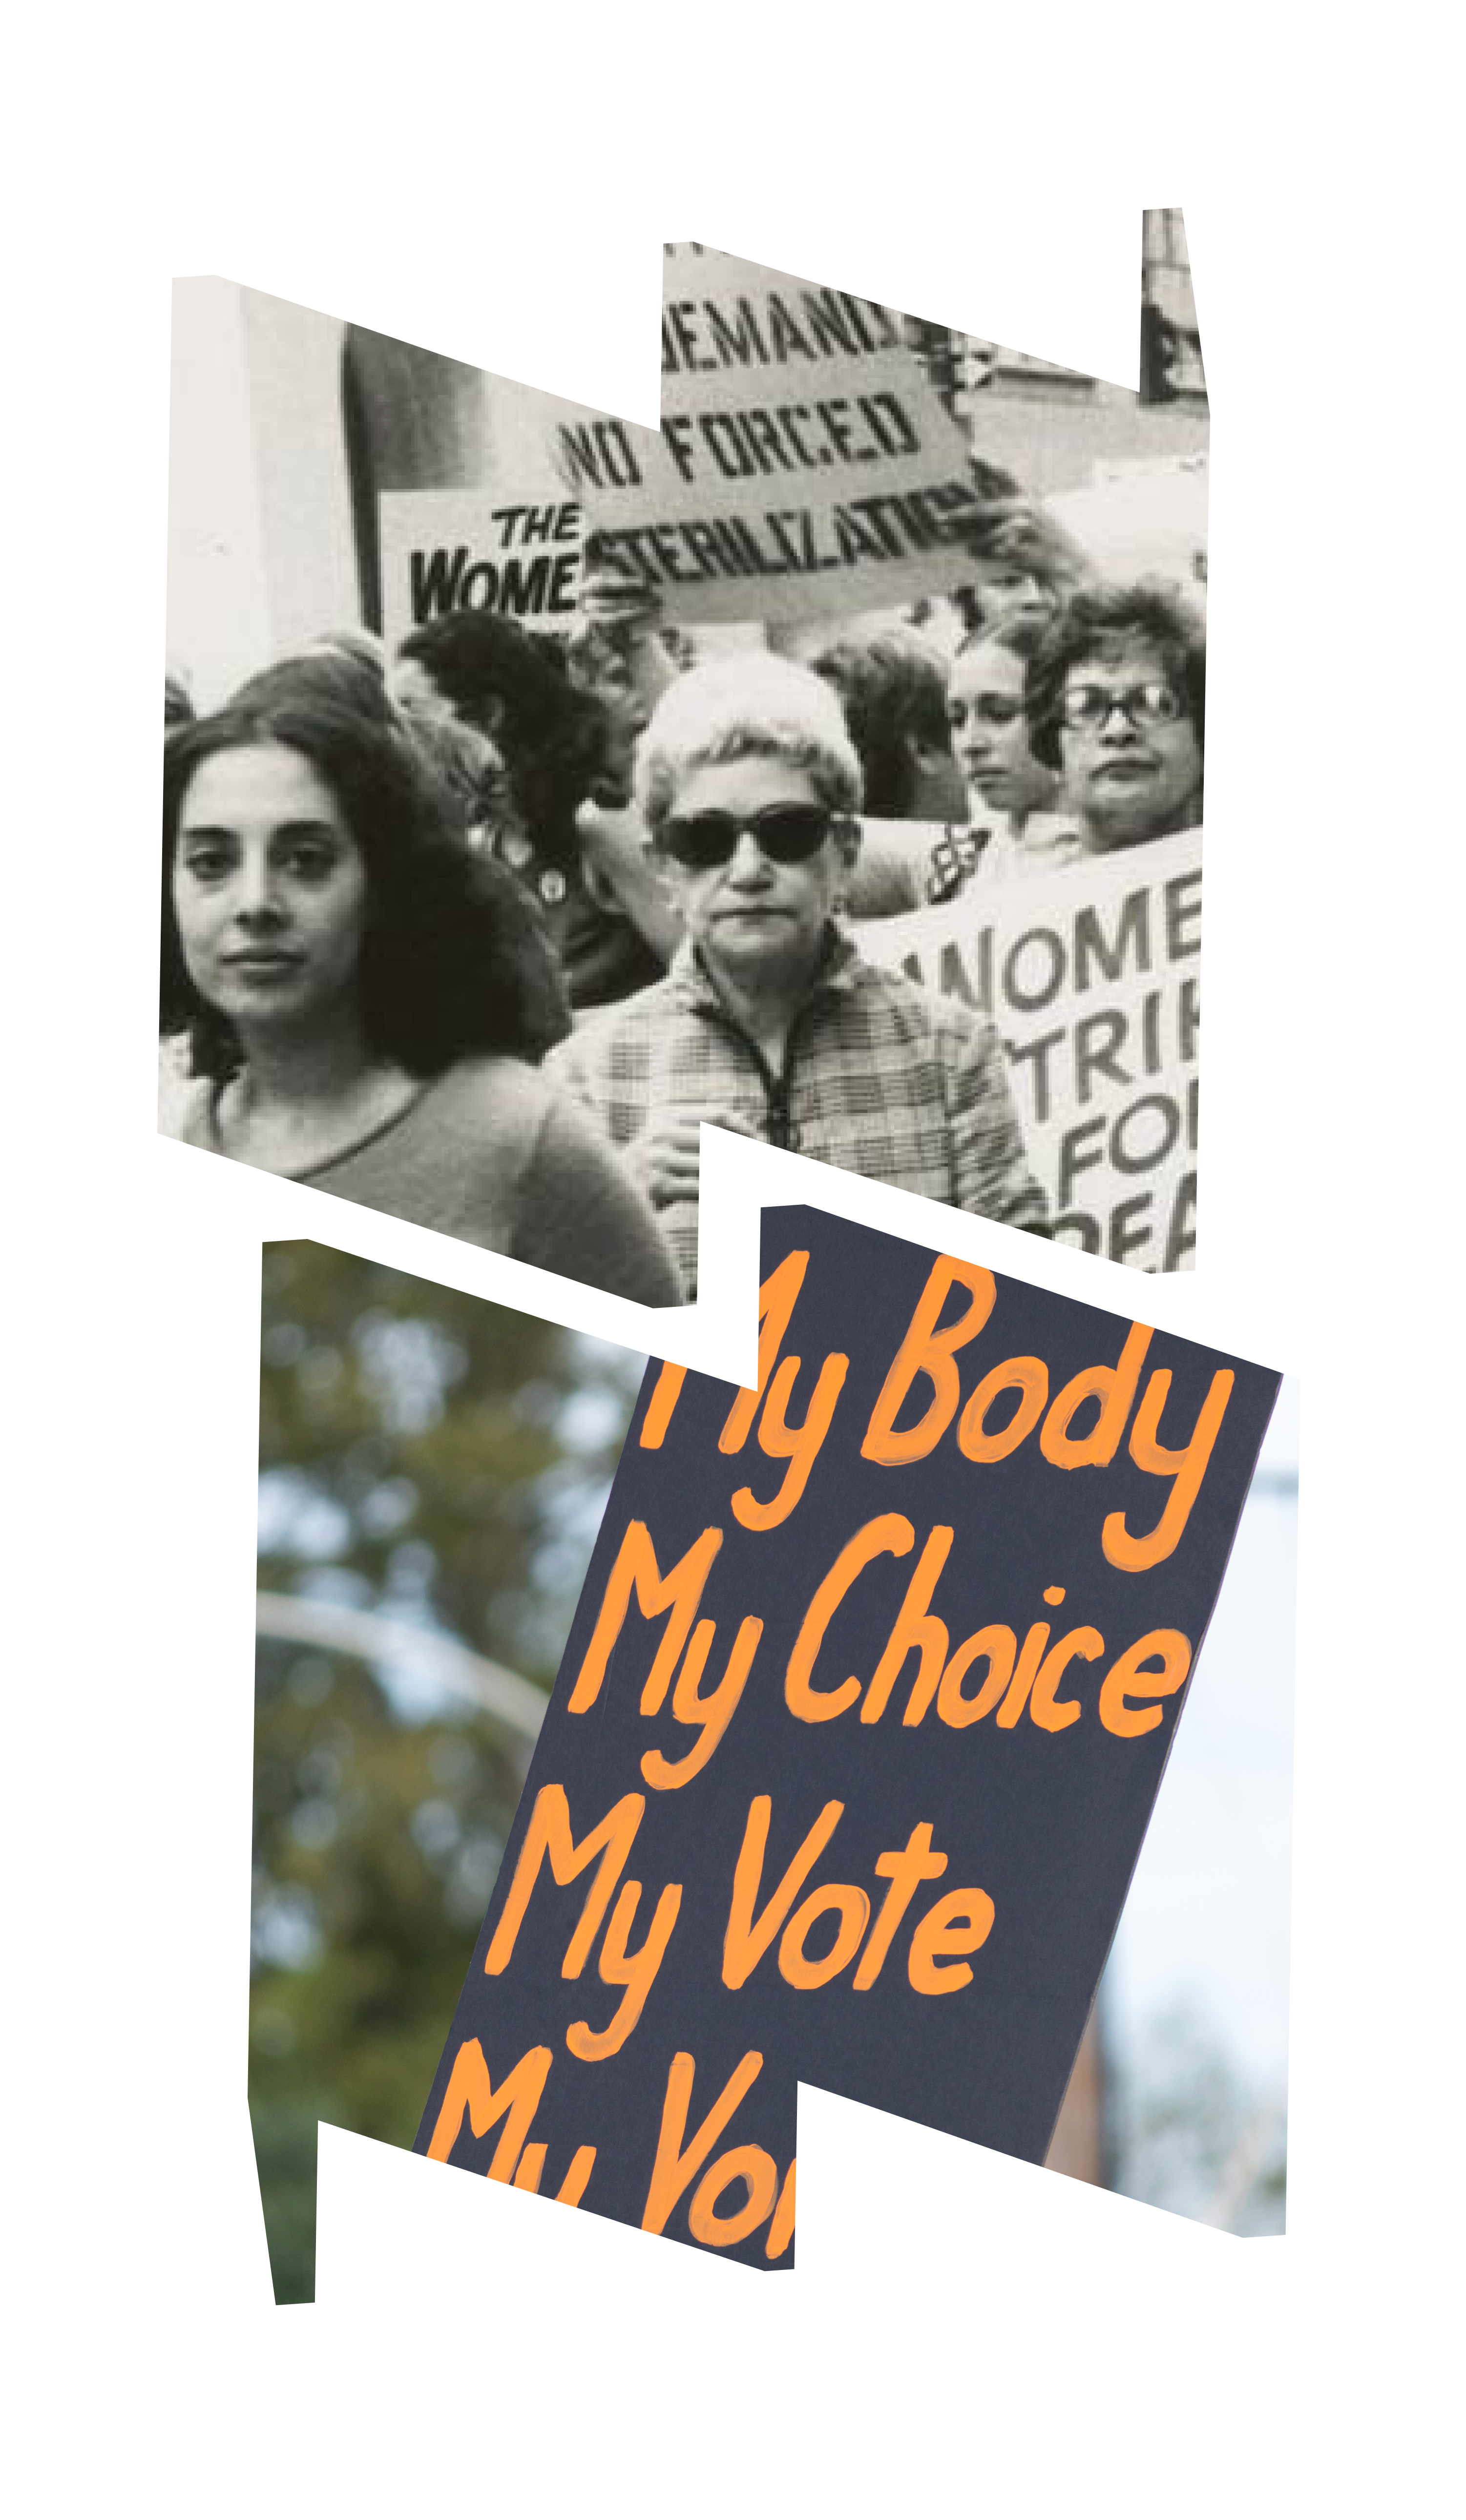 Two "W" frames: Left frame shows women marching in the 1970s at the March for Equality, right frame shows a sign that says "My Body, My Choice, My Vote, My Voice." 